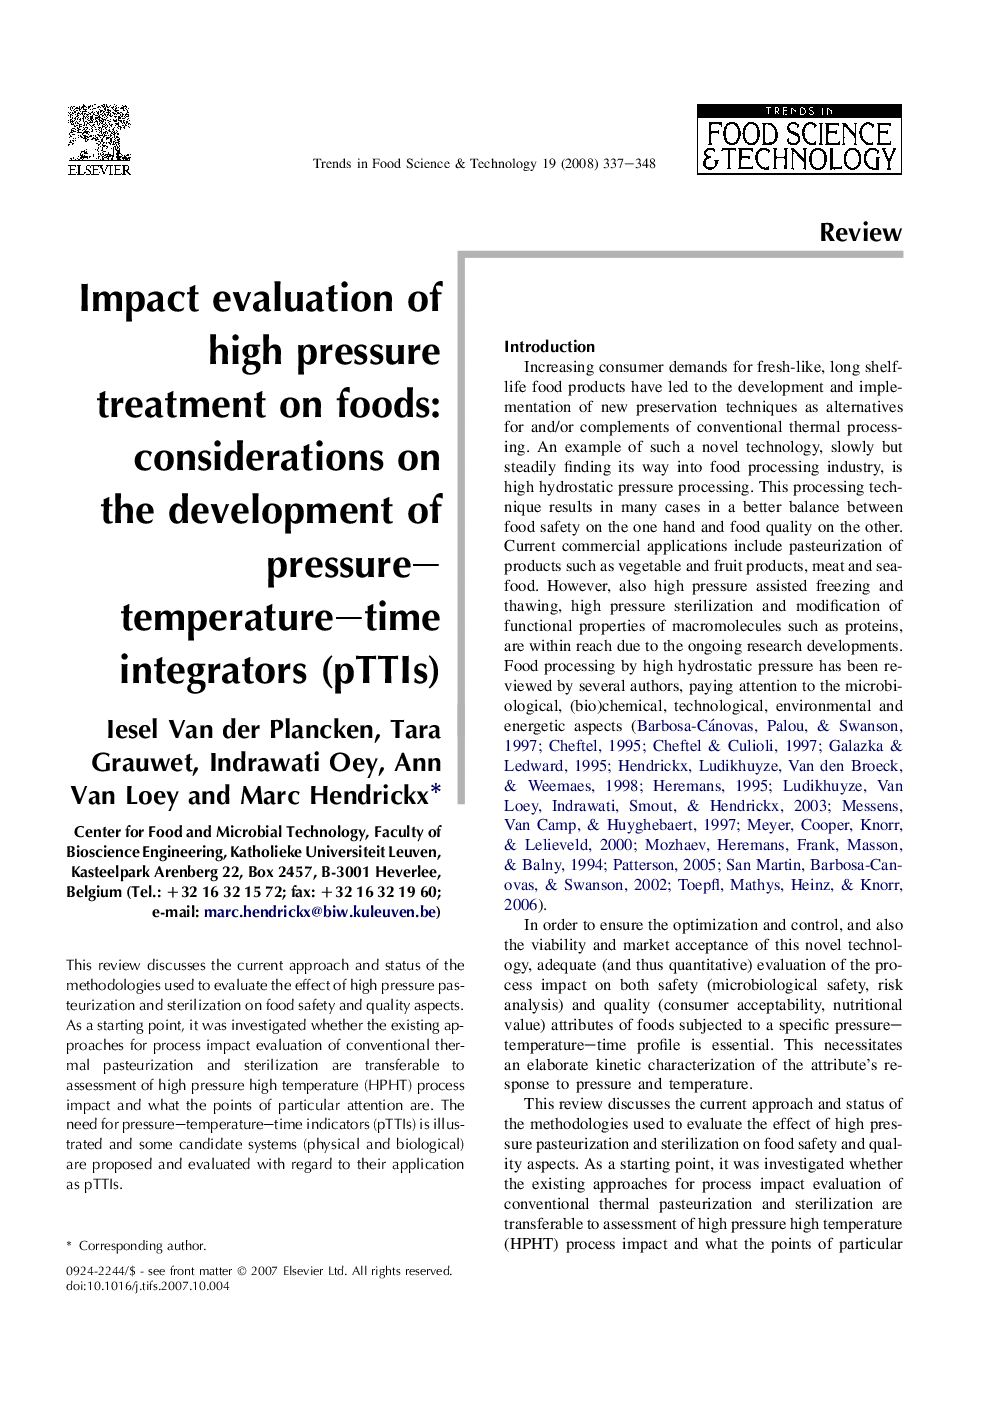 Impact evaluation of high pressure treatment on foods: considerations on the development of pressure–temperature–time integrators (pTTIs)